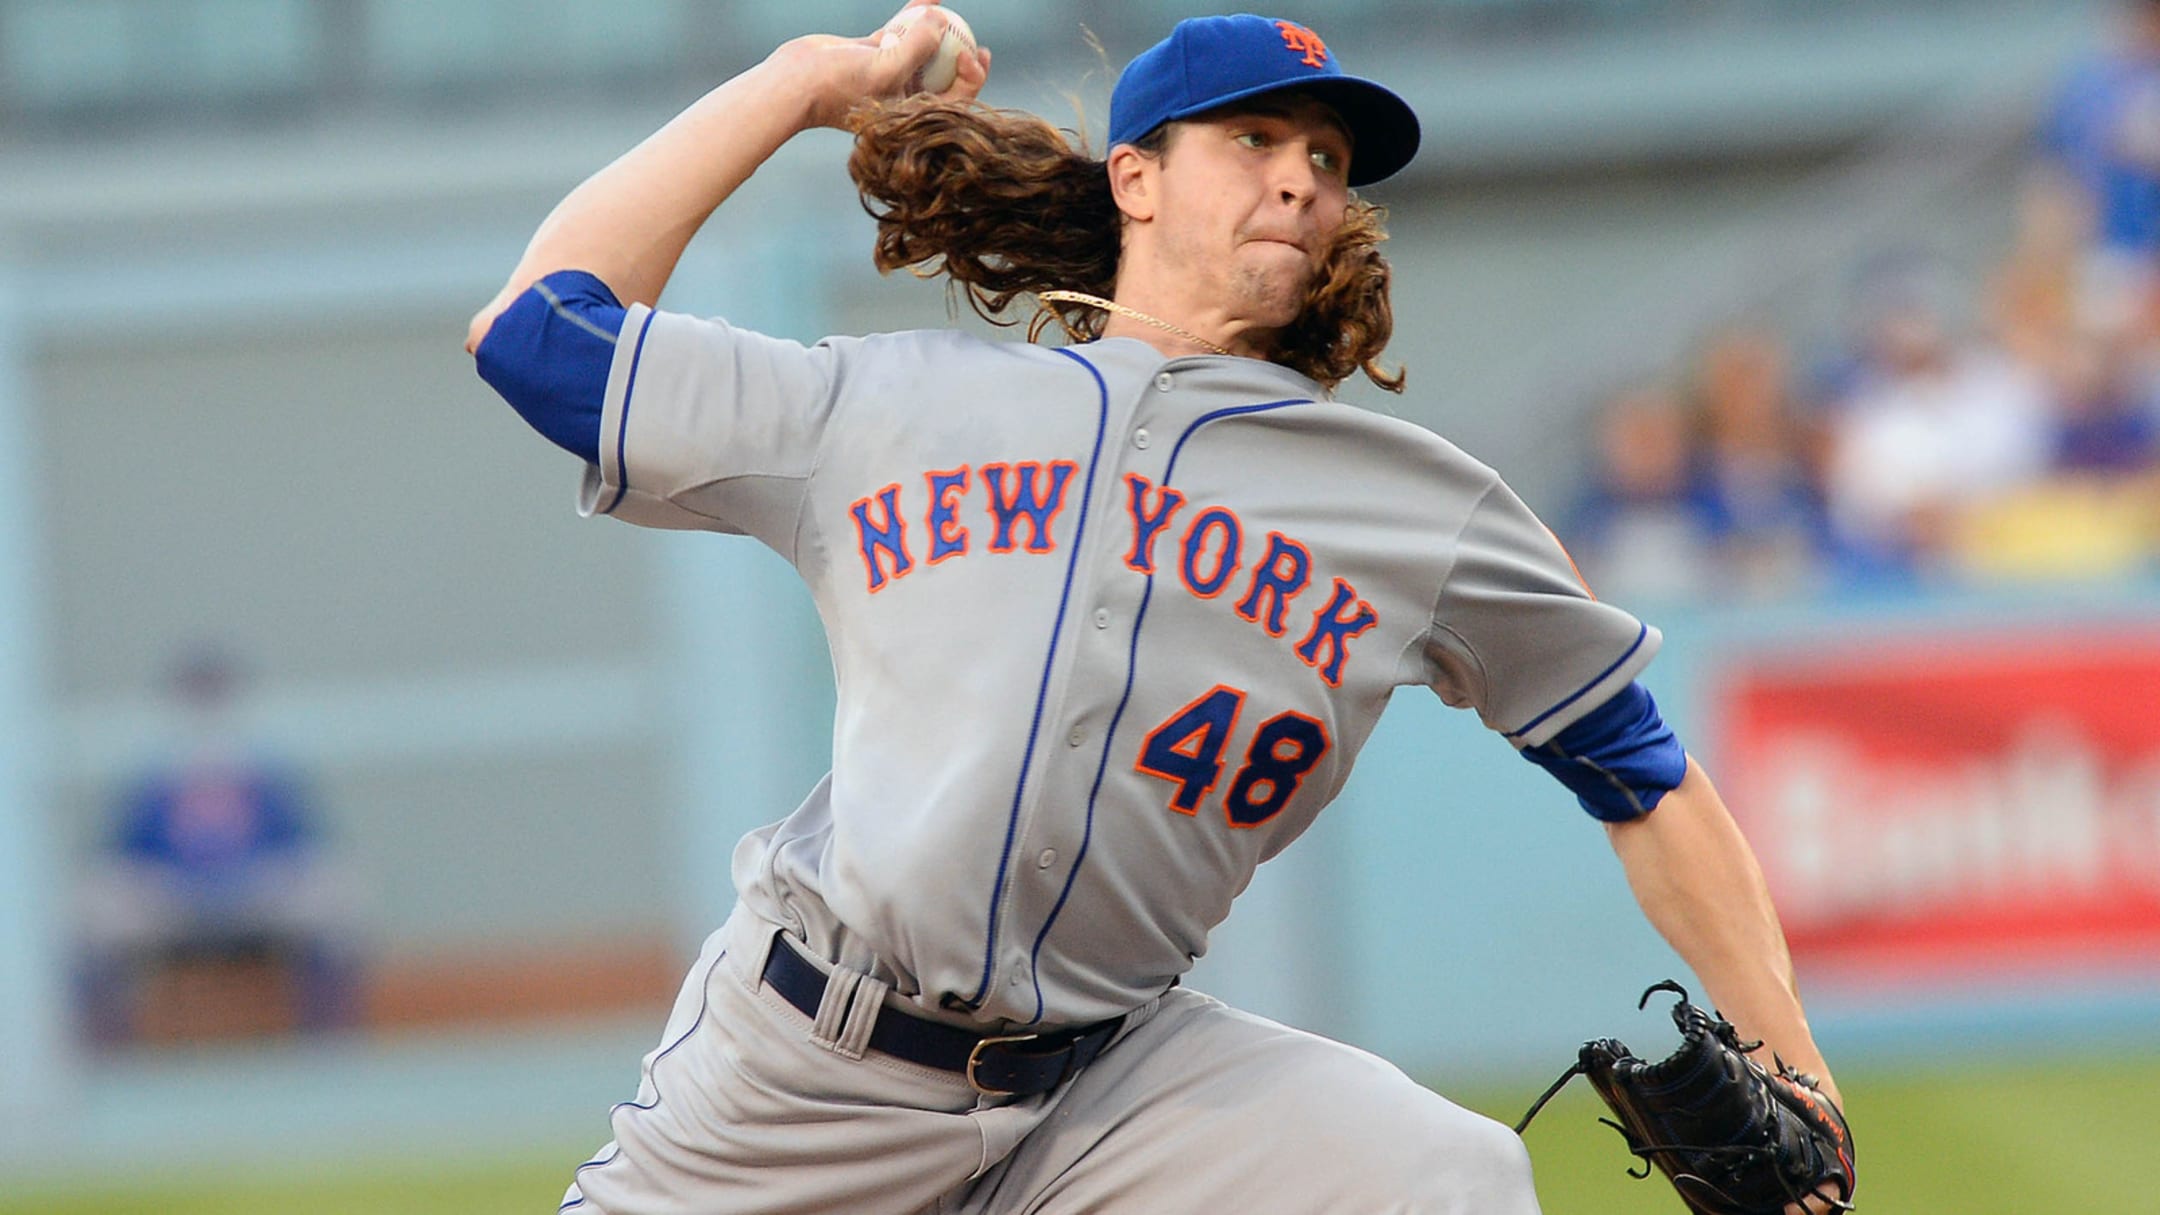 Jacob deGrom planning to cut his long hair